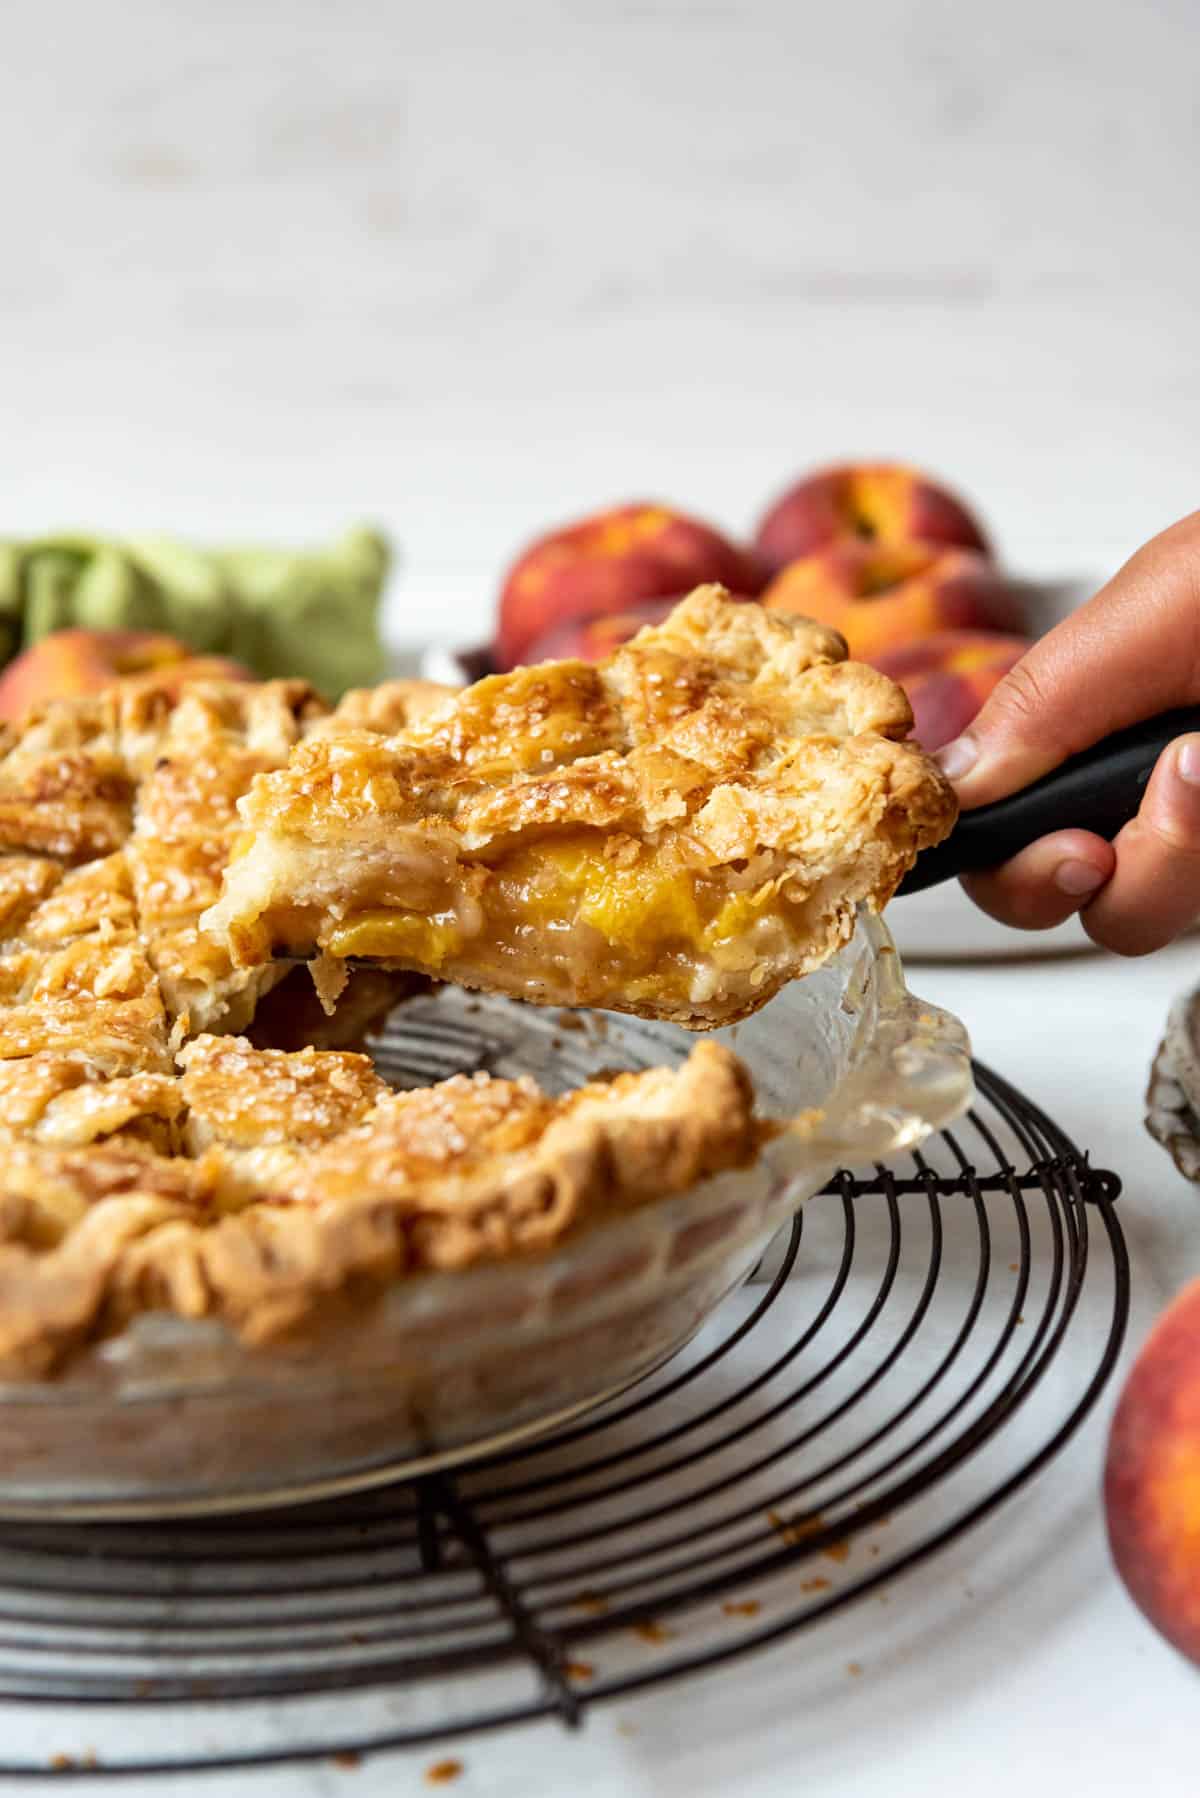 A hand lifting a slice of homemade peach pie from the pie dish.